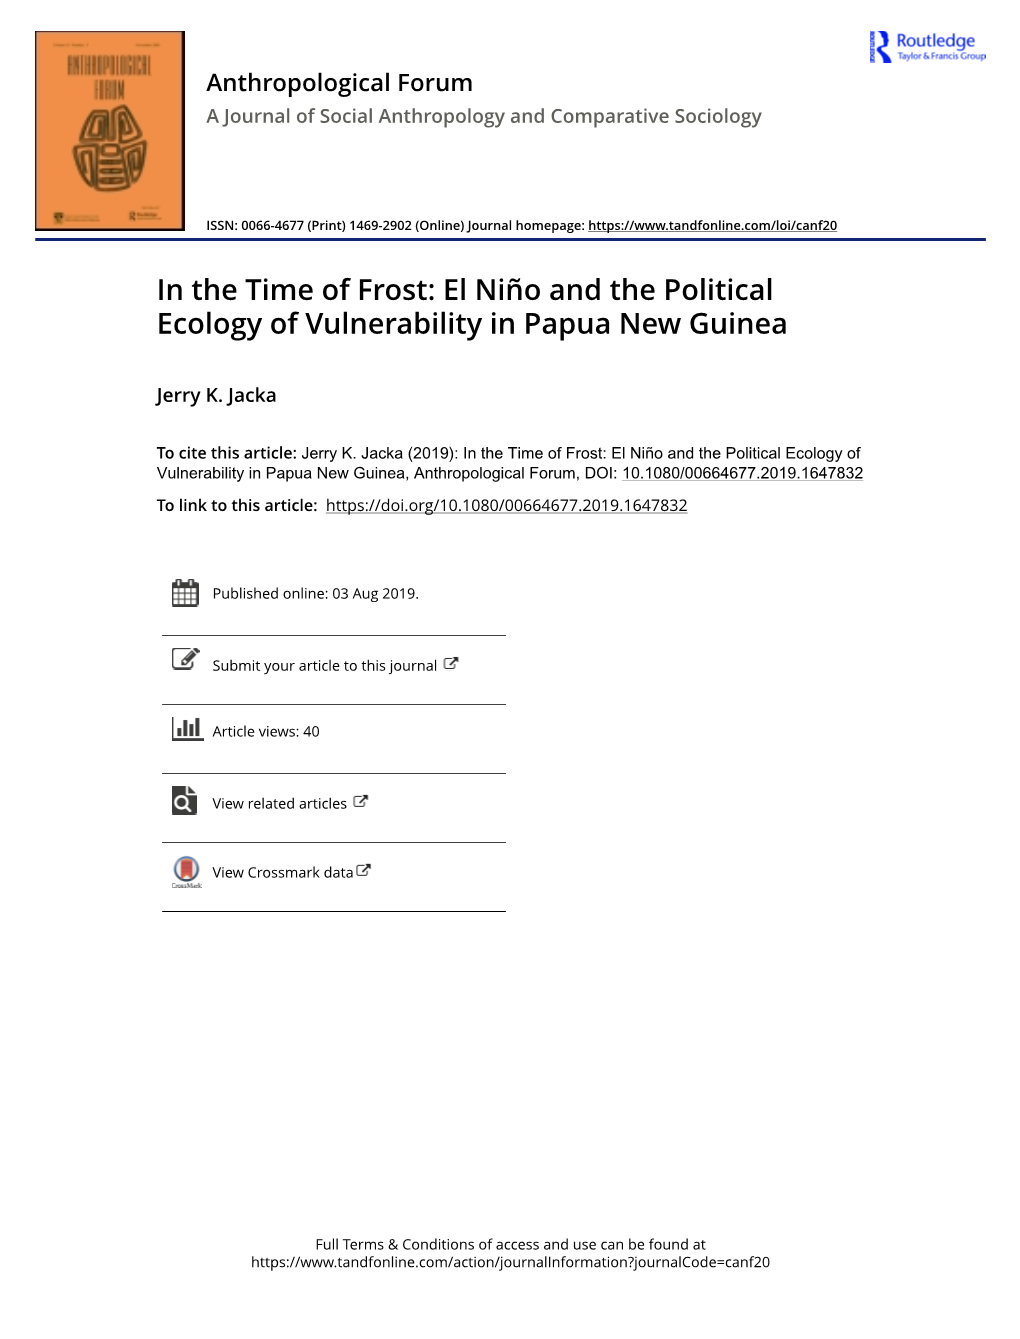 In the Time of Frost: El Niño and the Political Ecology of Vulnerability in Papua New Guinea